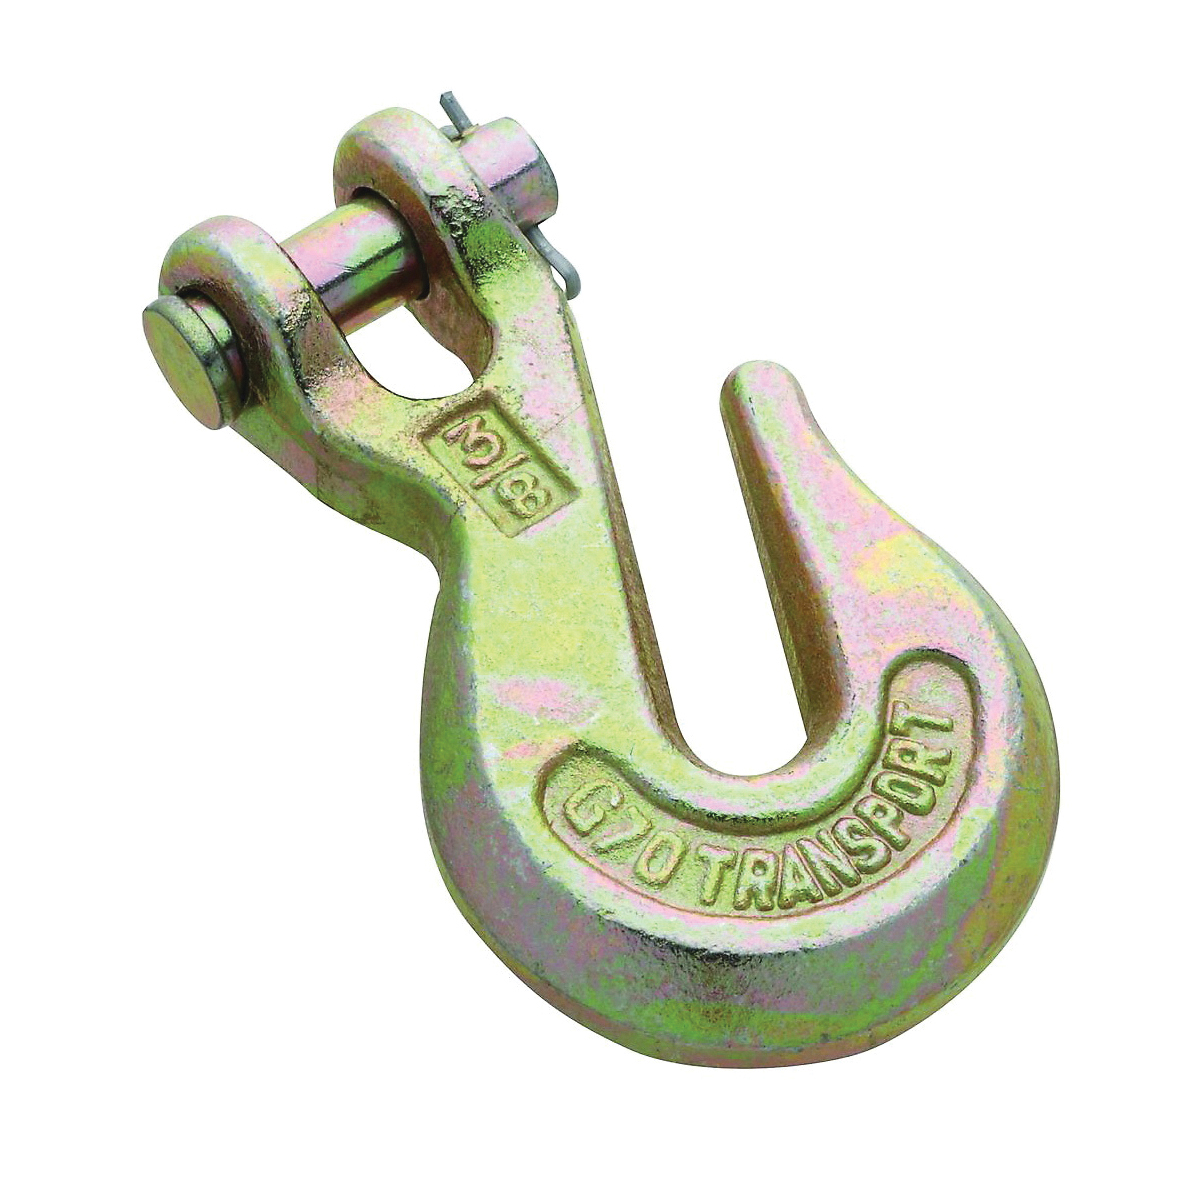 N282-079 Clevis Grab Hook, 3/8 in, 6600 lb Working Load, Steel, Yellow Chrome